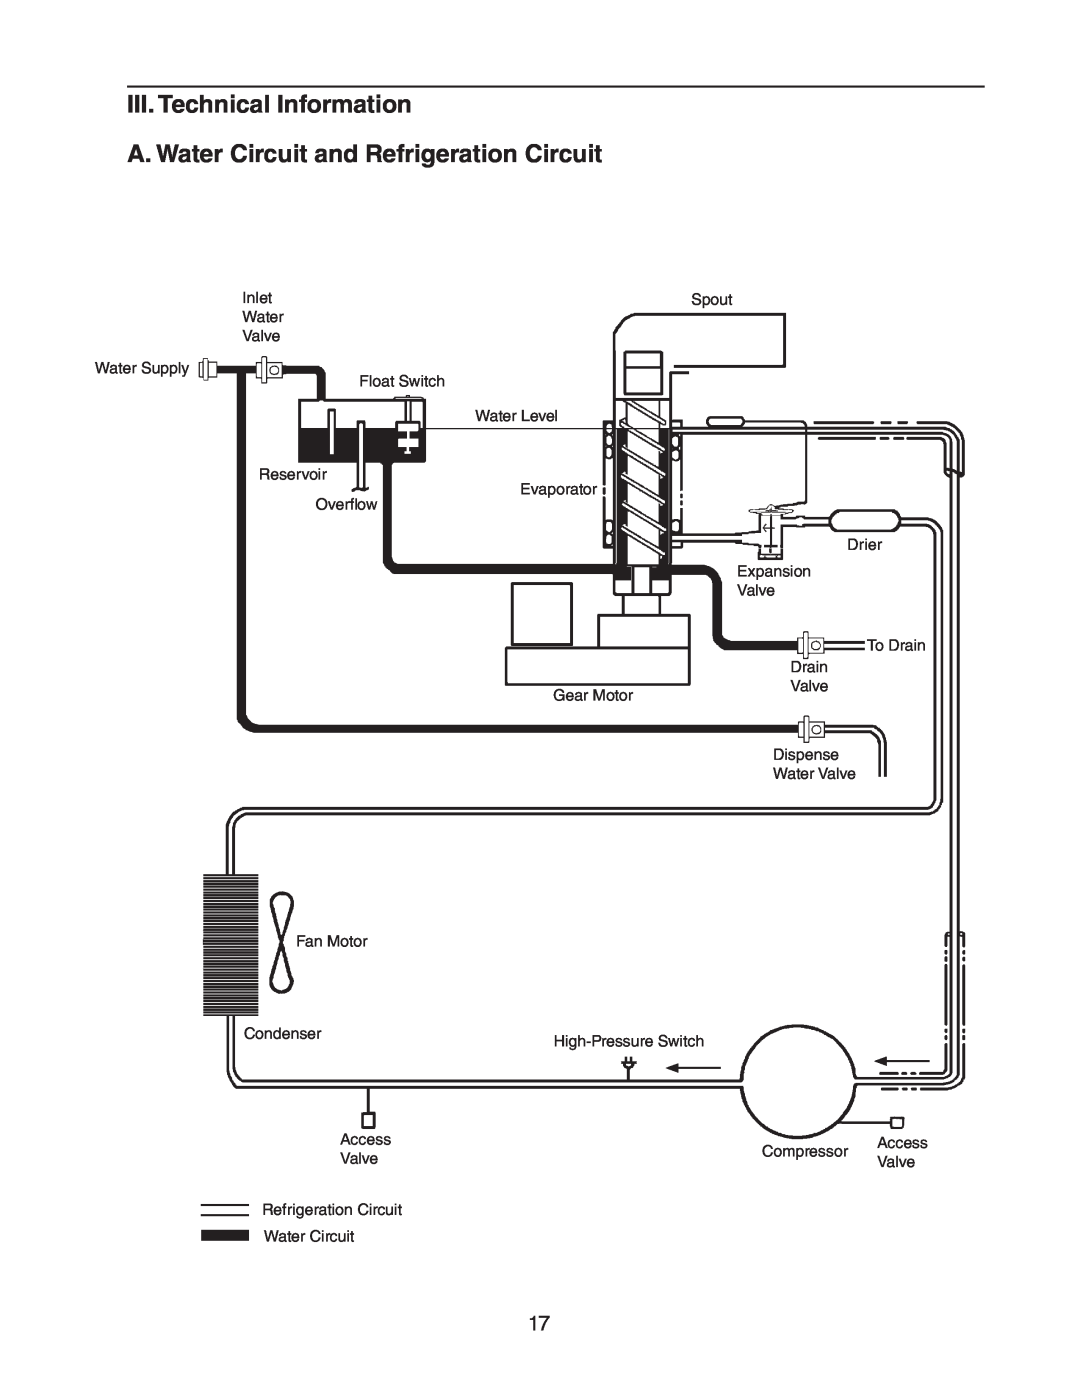 Hoshizaki DCM 300BAH(-OS) service manual III. Technical Information A. Water Circuit and Refrigeration Circuit, Spout 